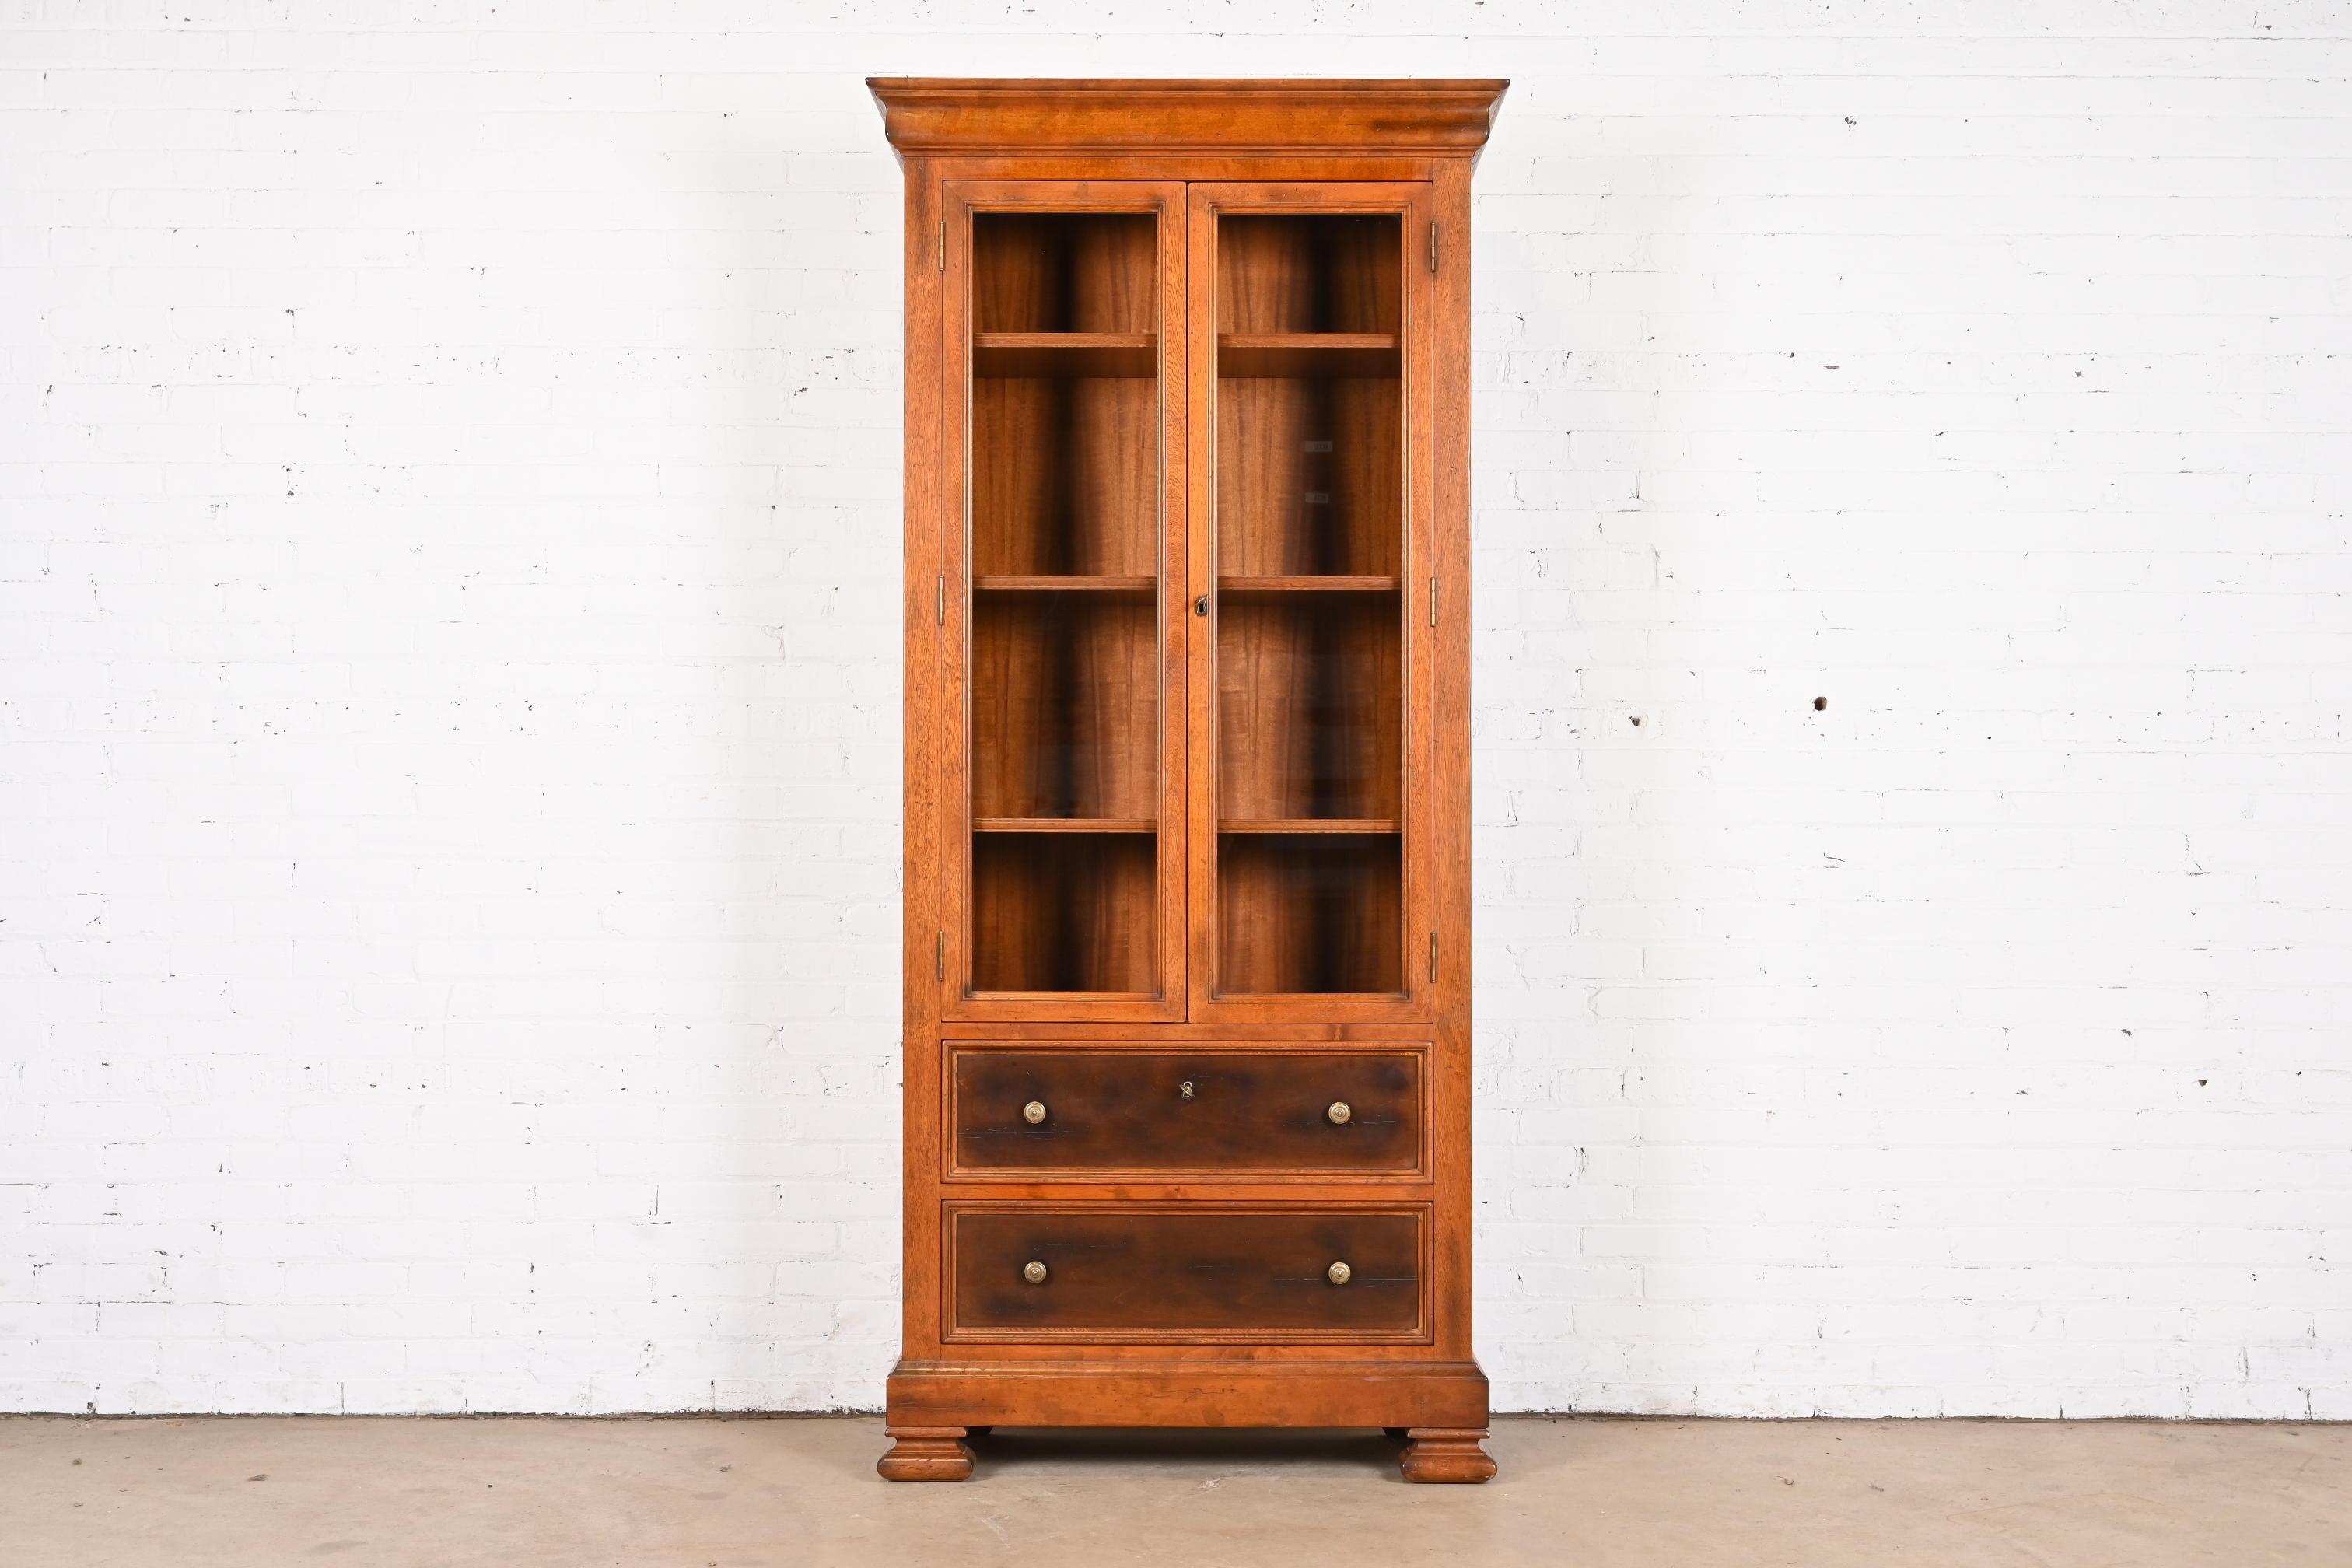 An outstanding Italian Provincial or Rustic European style bibliotheque bookcase cabinet

By Baker Furniture, 